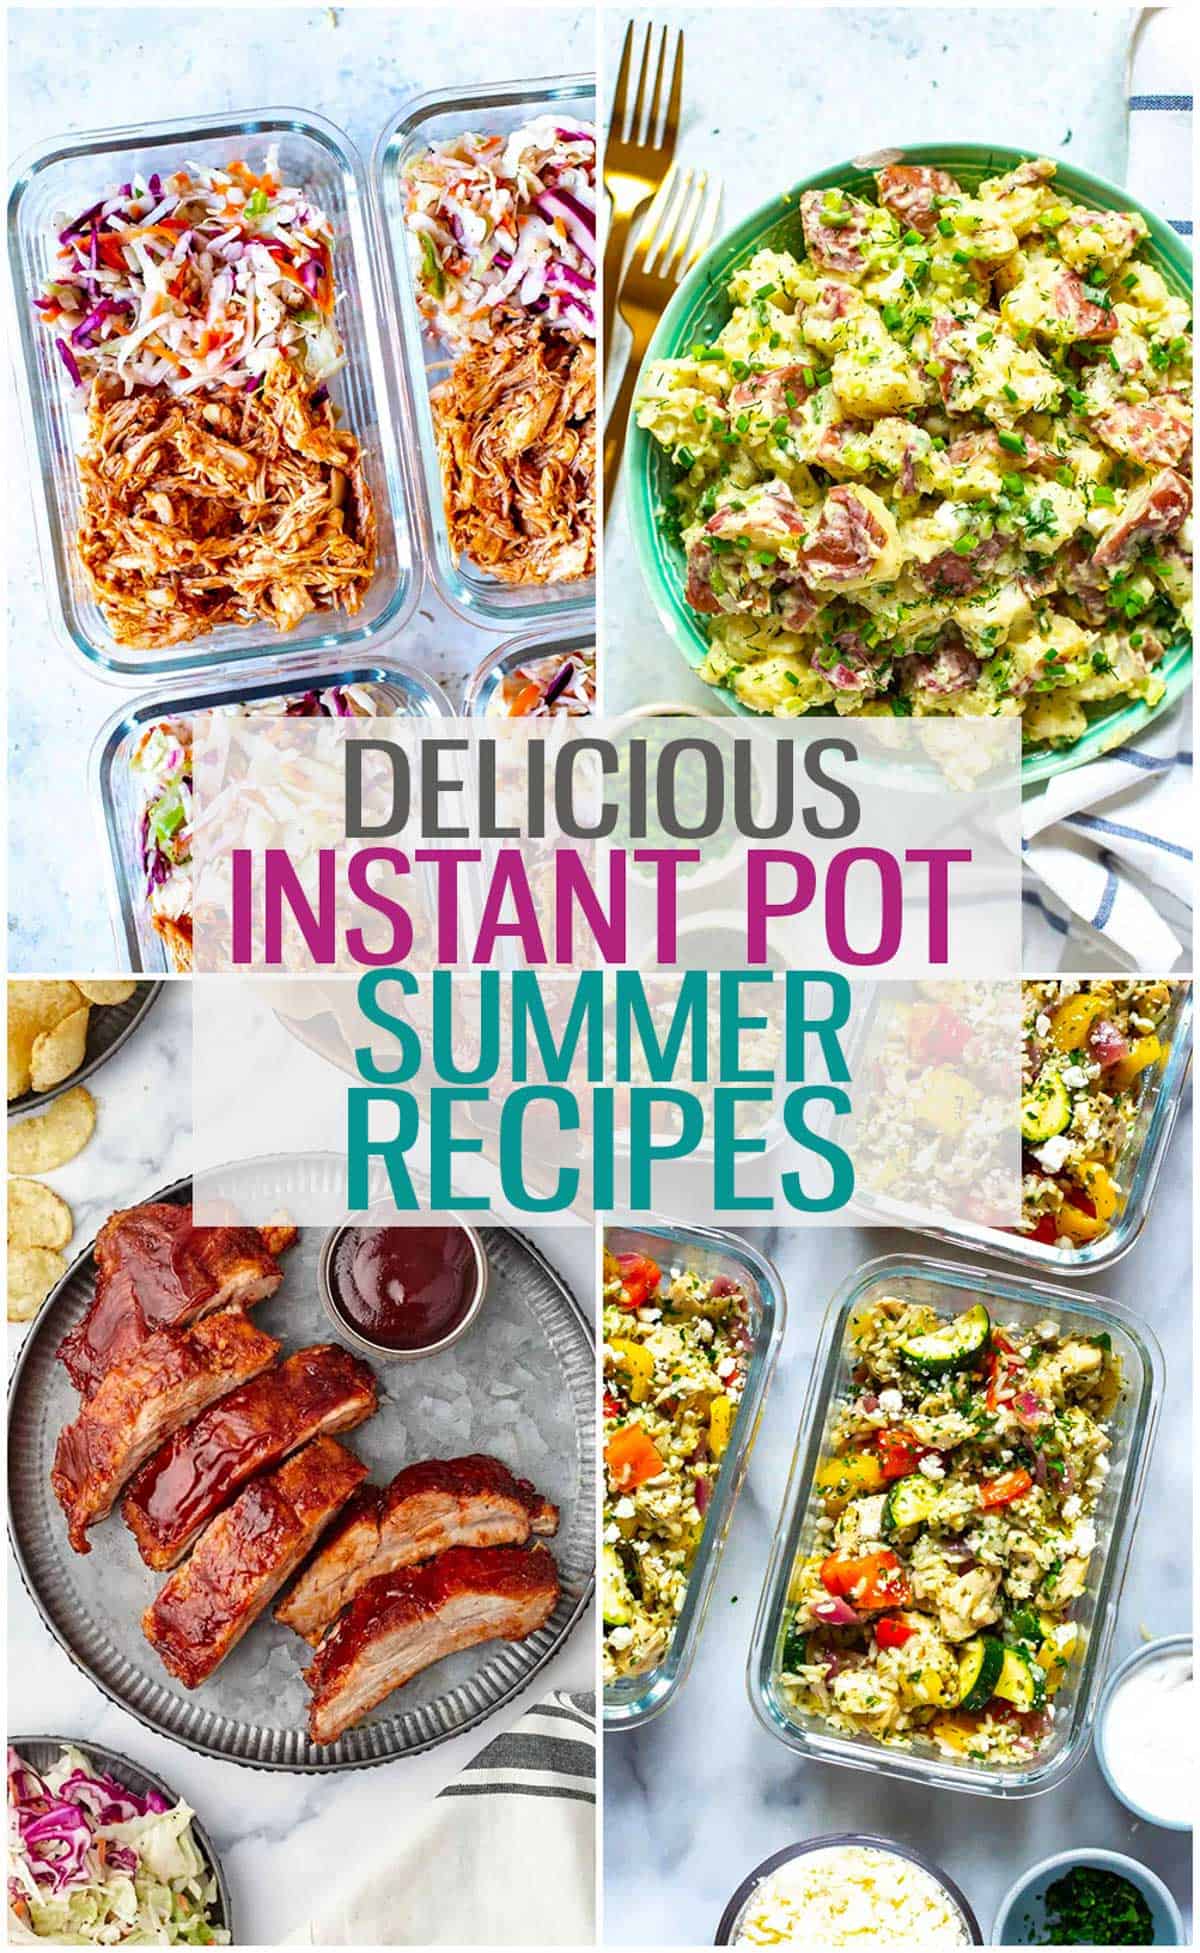 A collage of four different Instant Pot summer recipes with the text "Delicious Instant Pot Summer Recipes" layered over top.